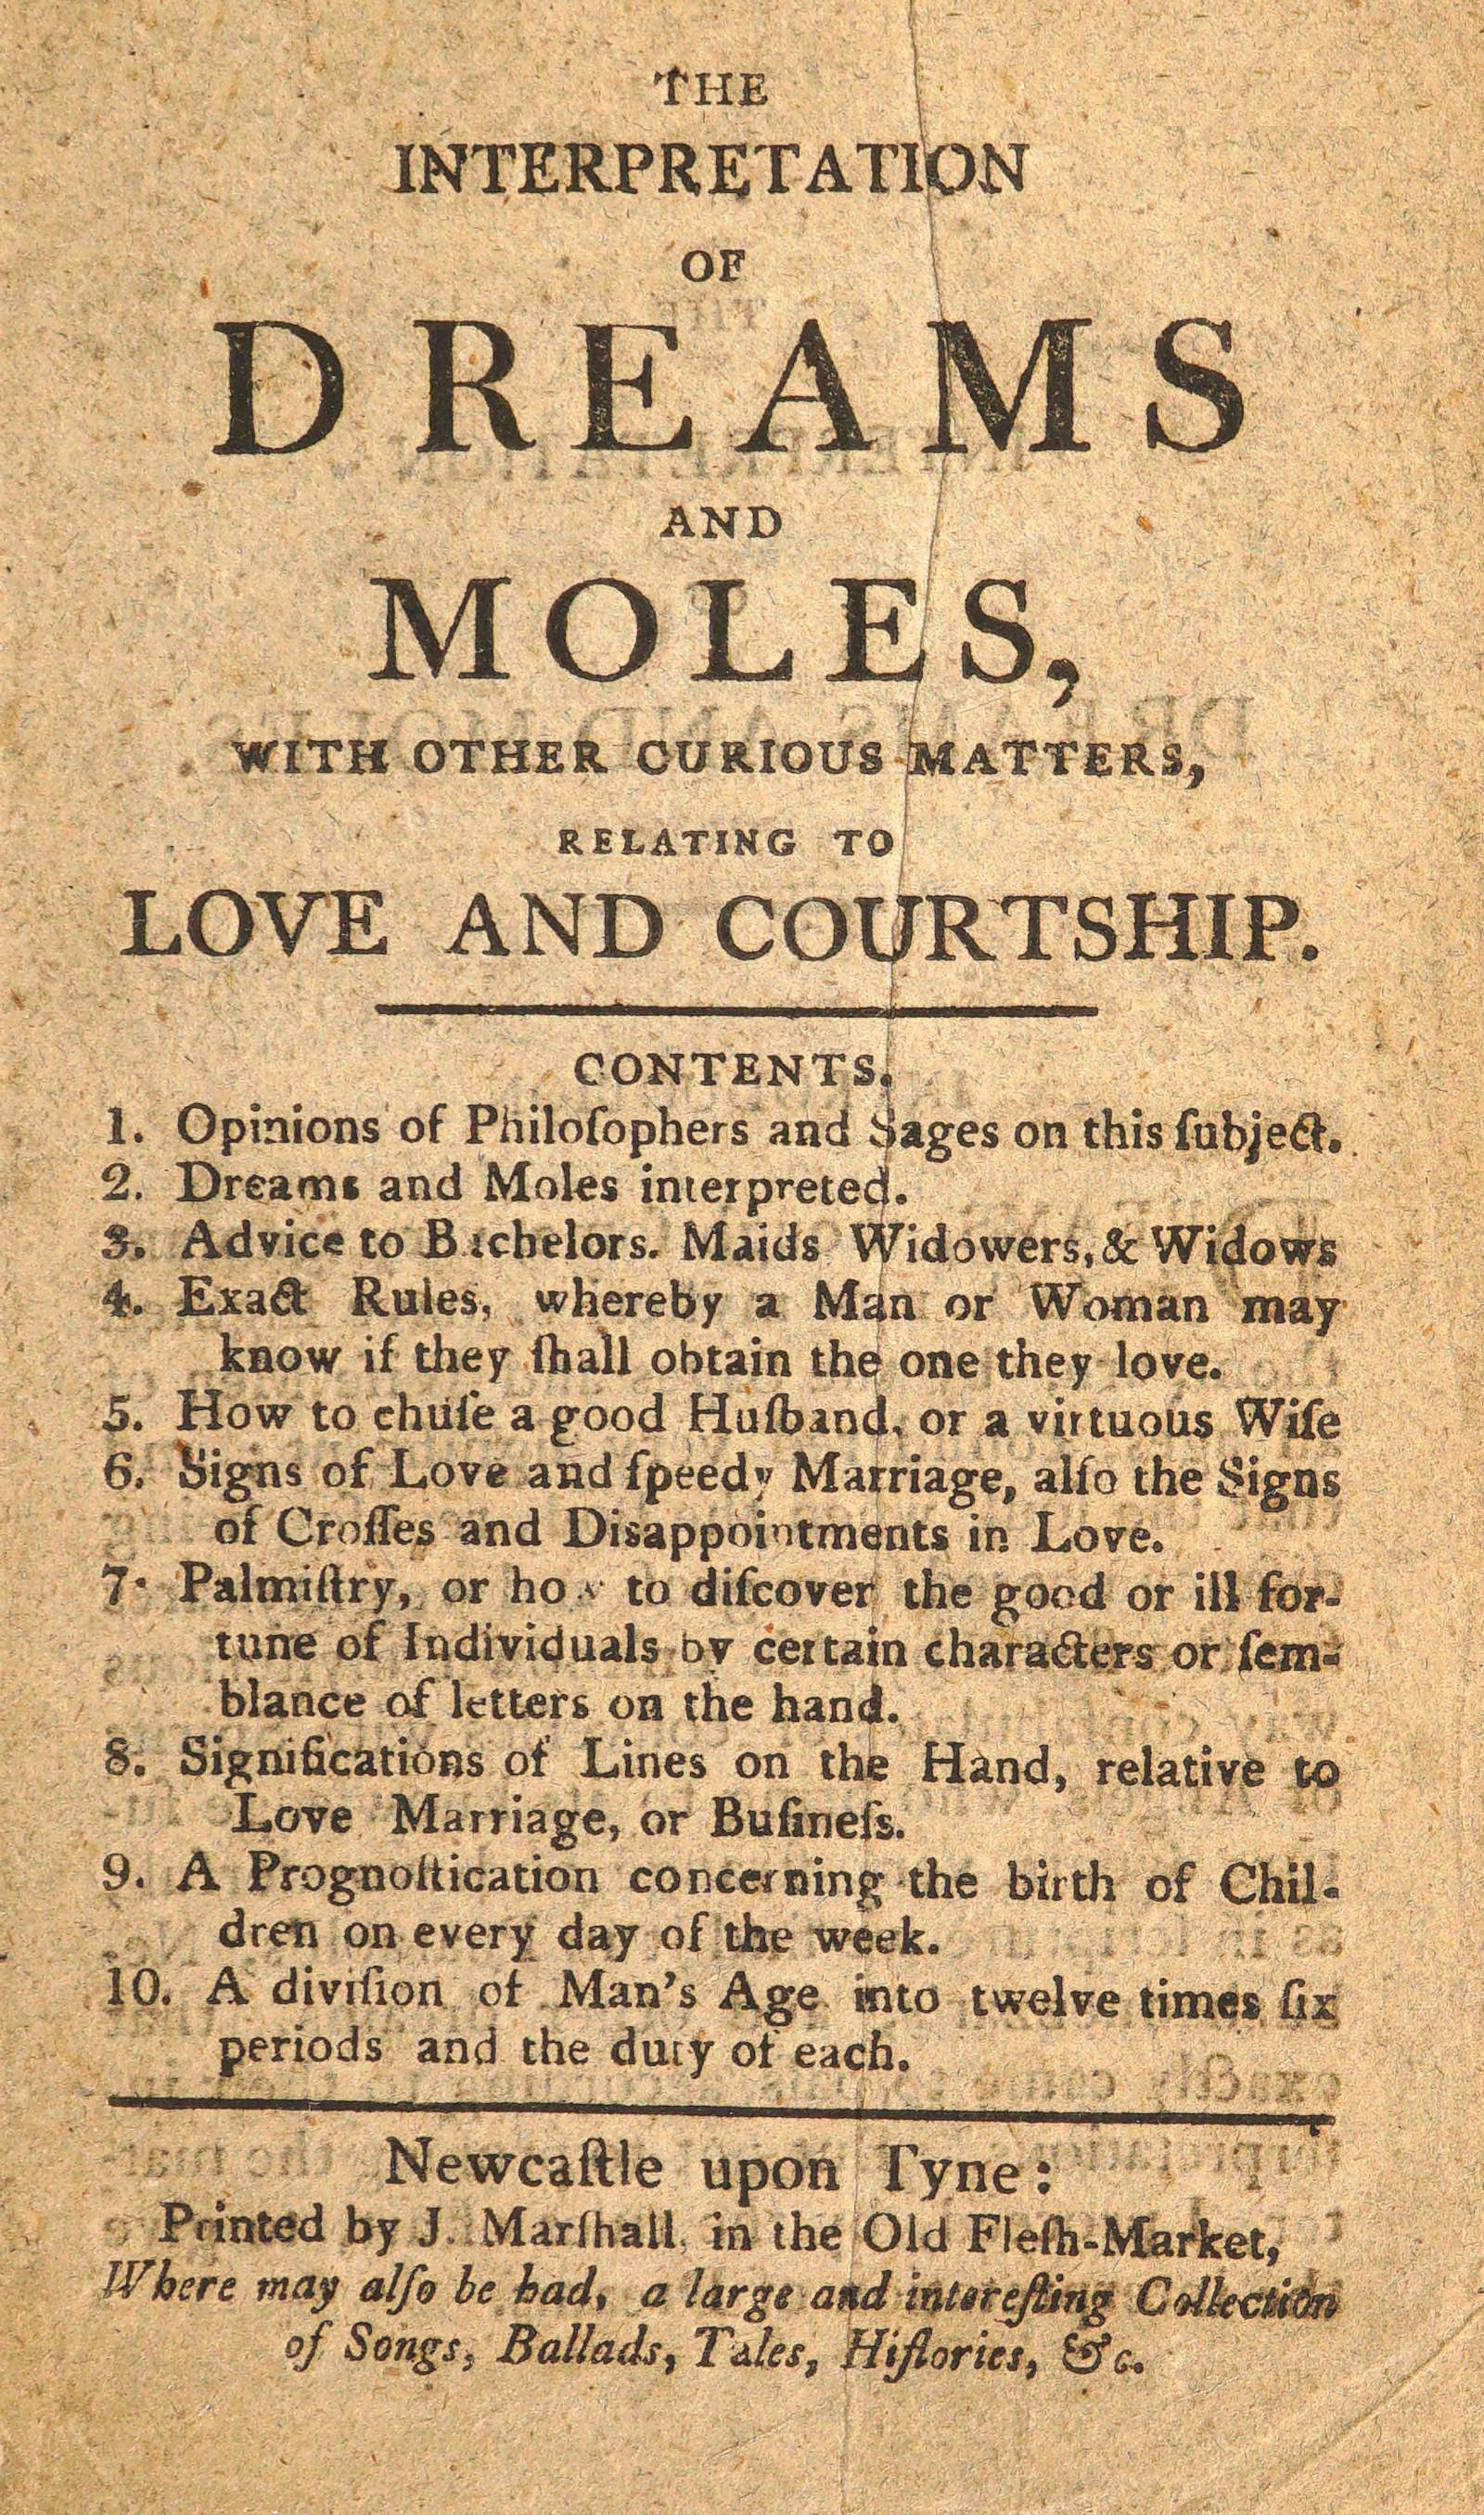 The interpretation of dreams and moles, with other curious matters, relating to love and courtship